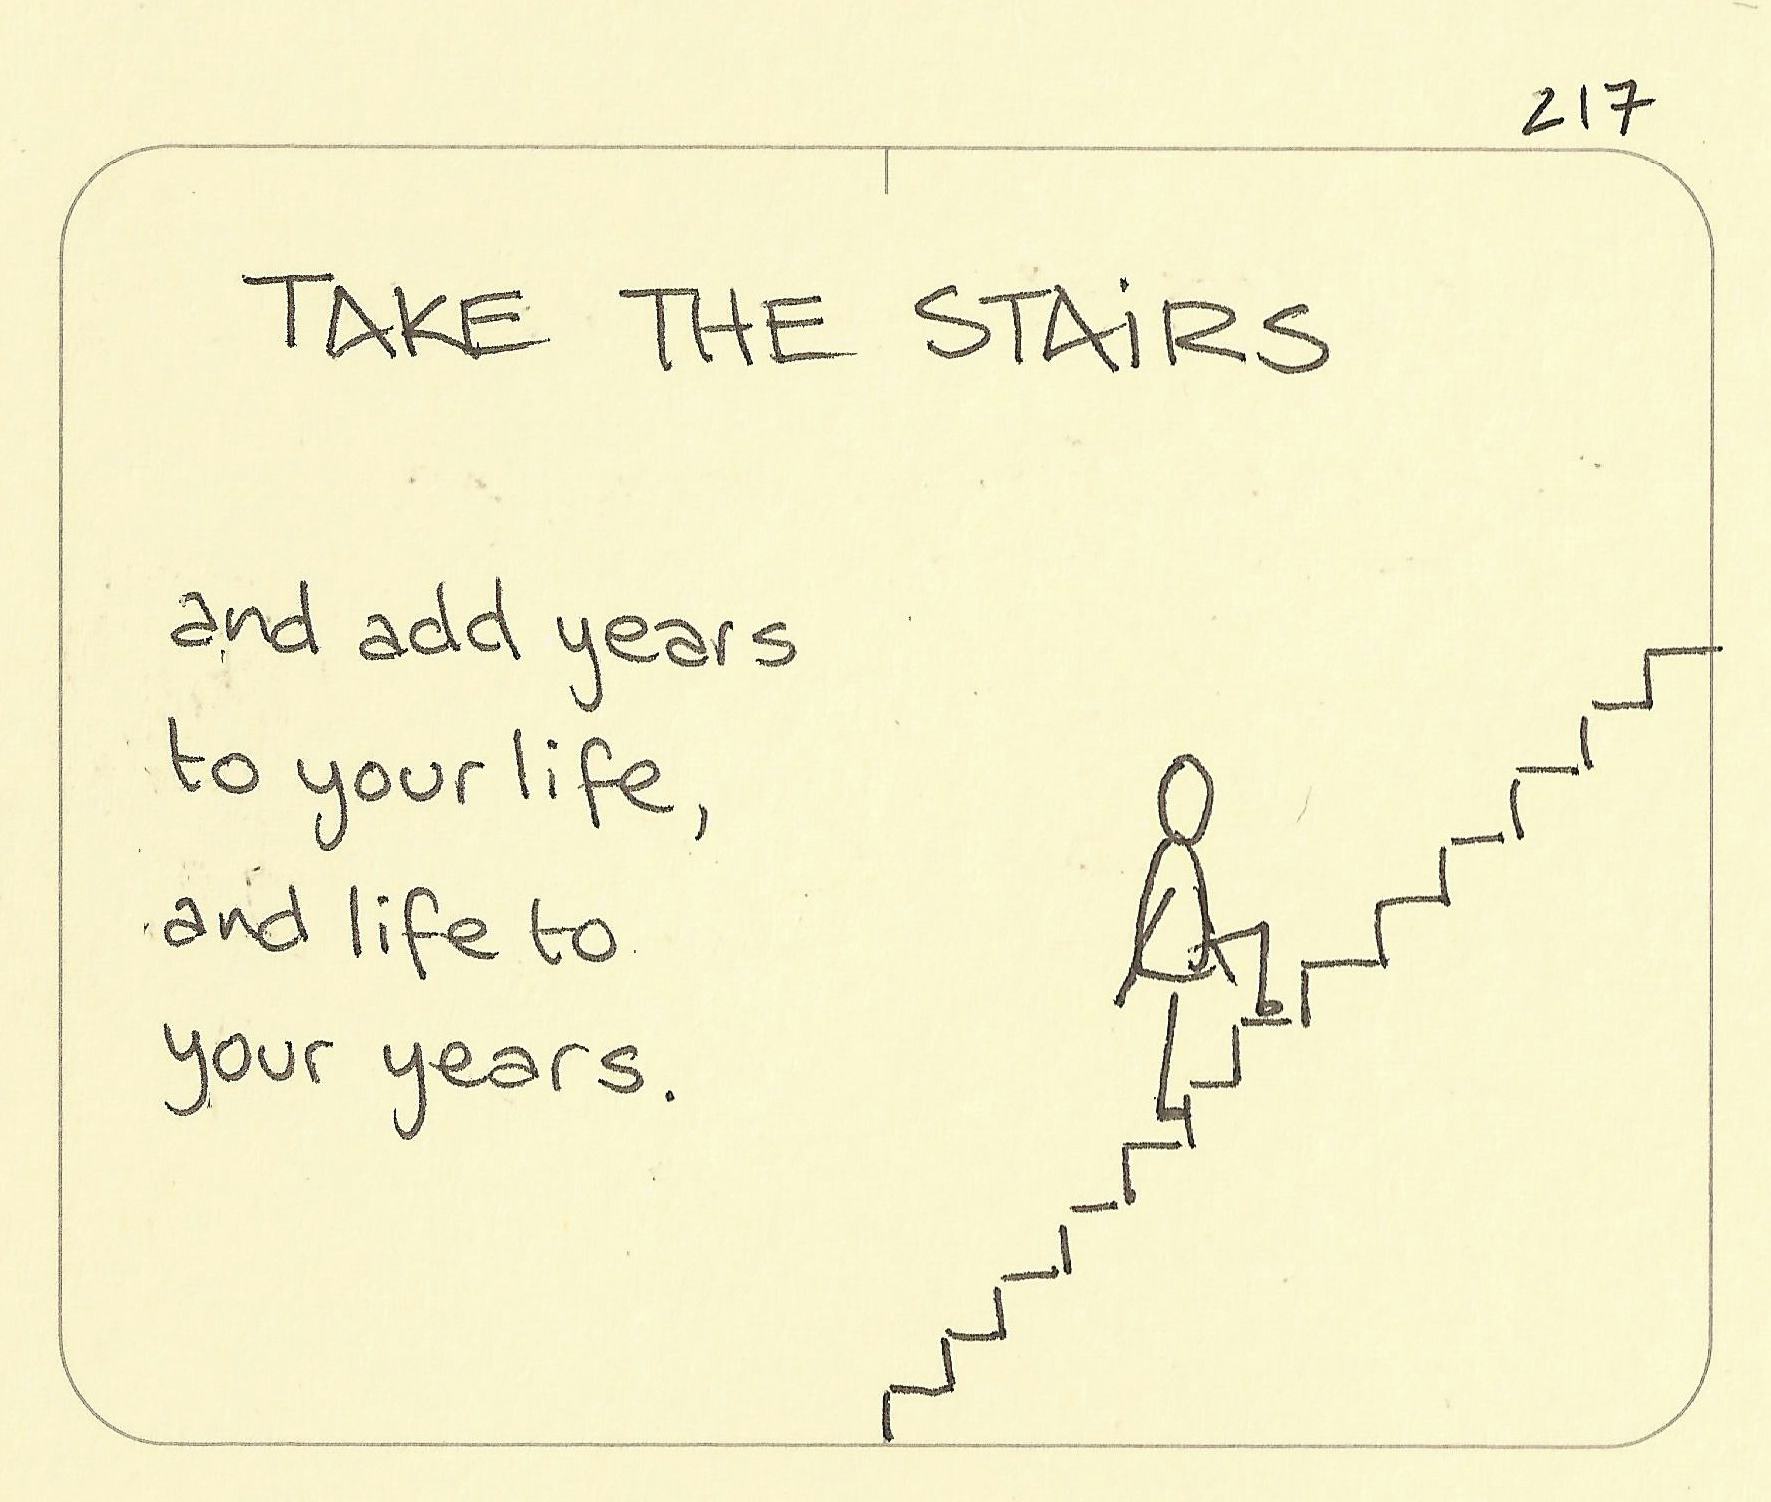 Take the stairs - Sketchplanations